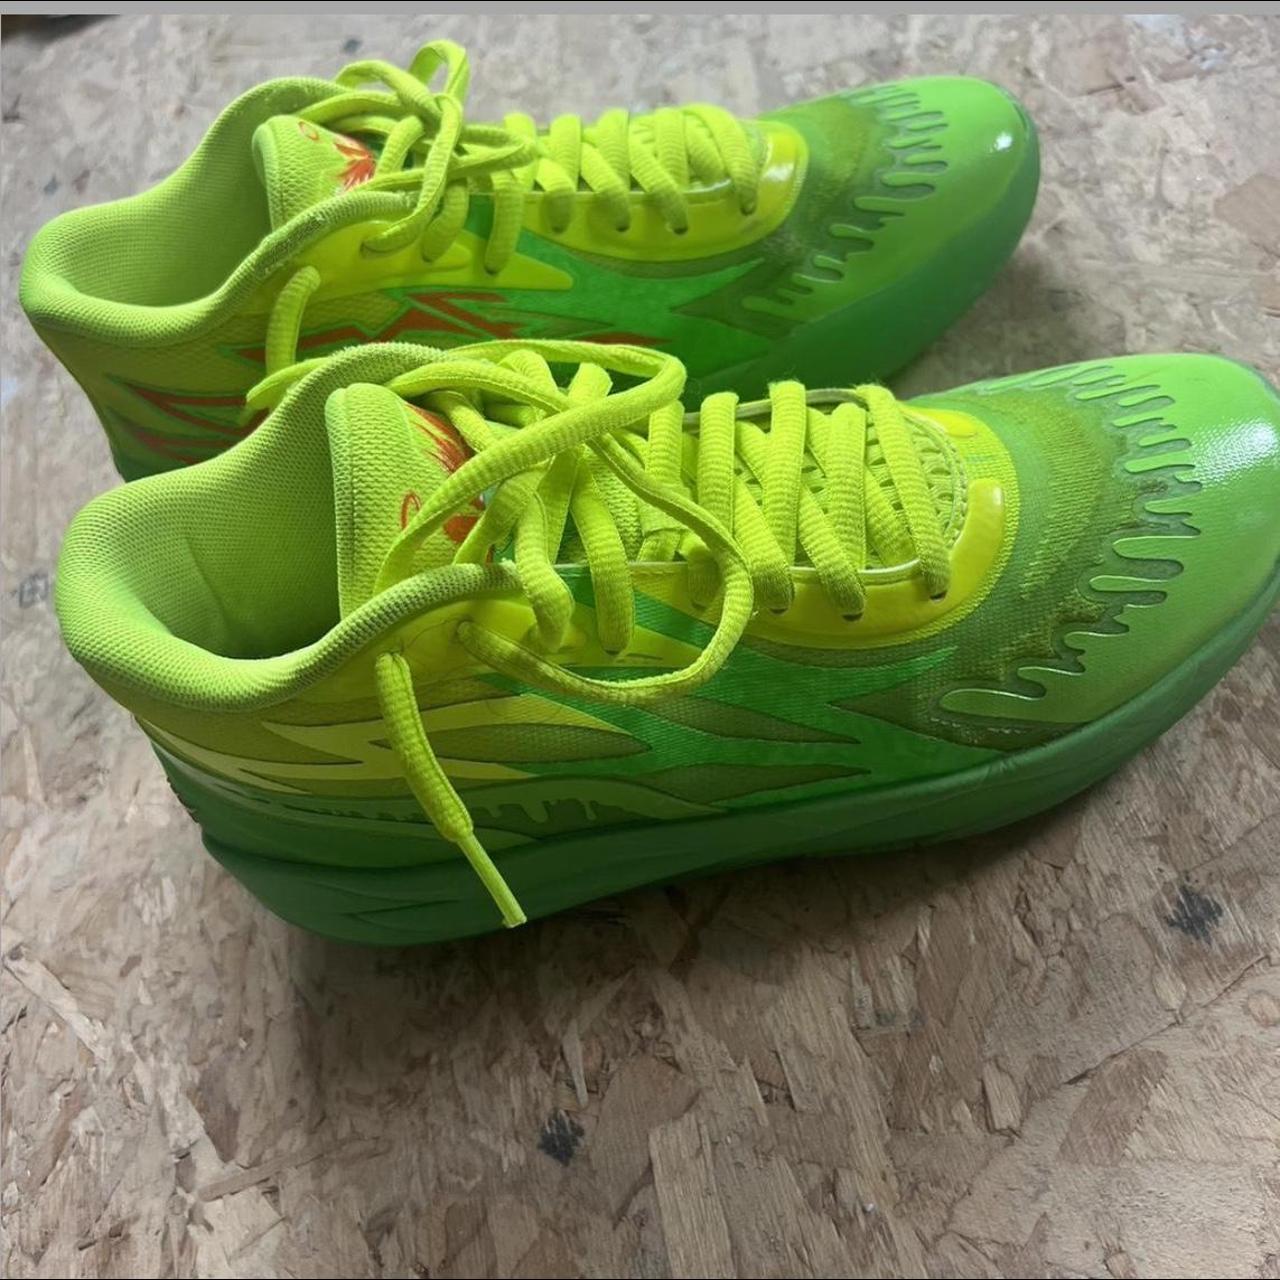 MB1 Melo Puma Nickelodeon Slime Size 7.5 Used - Depop